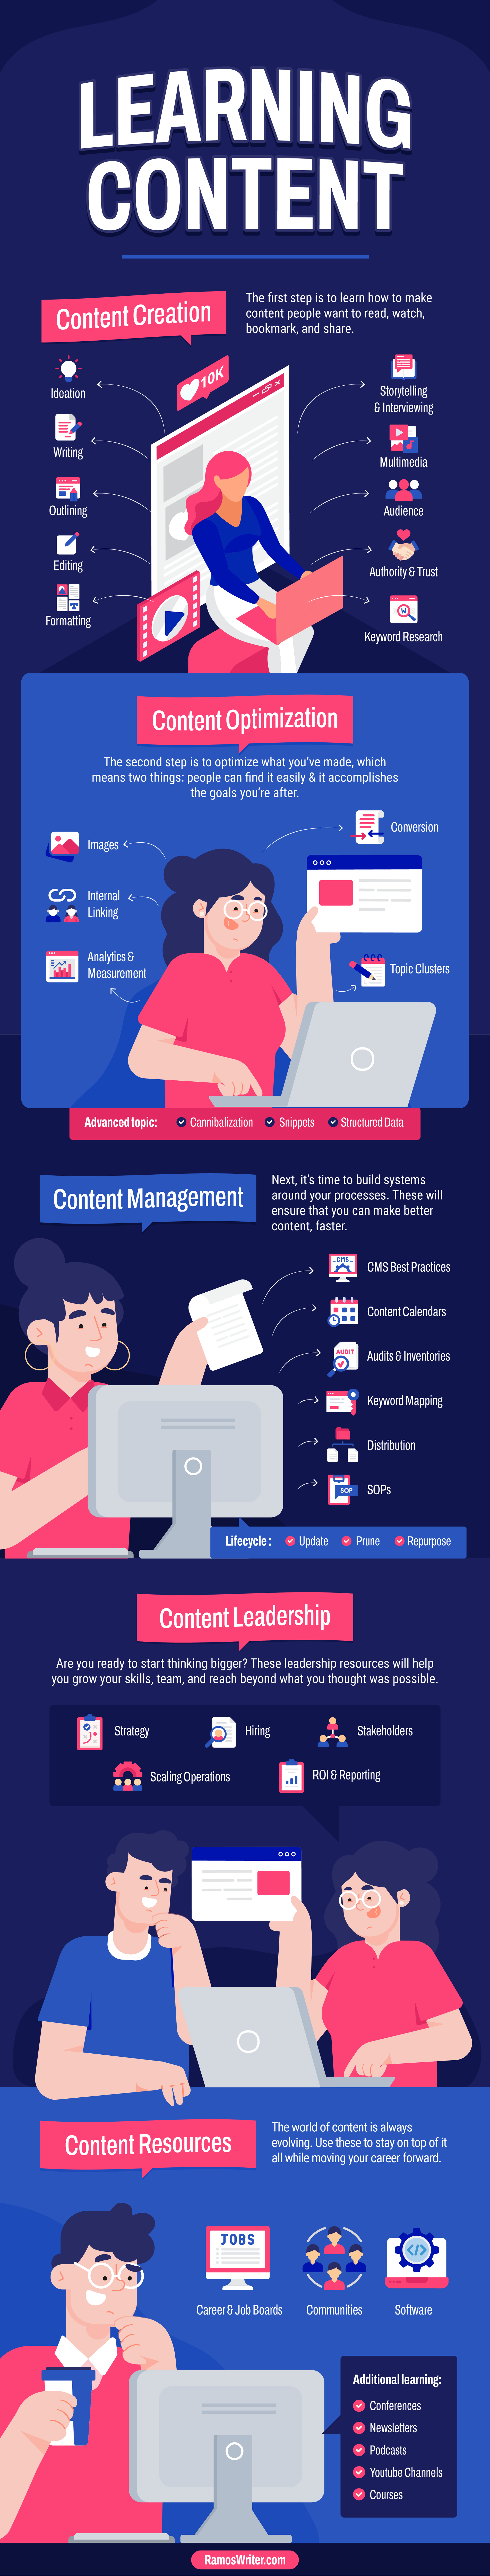 Infographic showing five levels of content marketing skills and resources